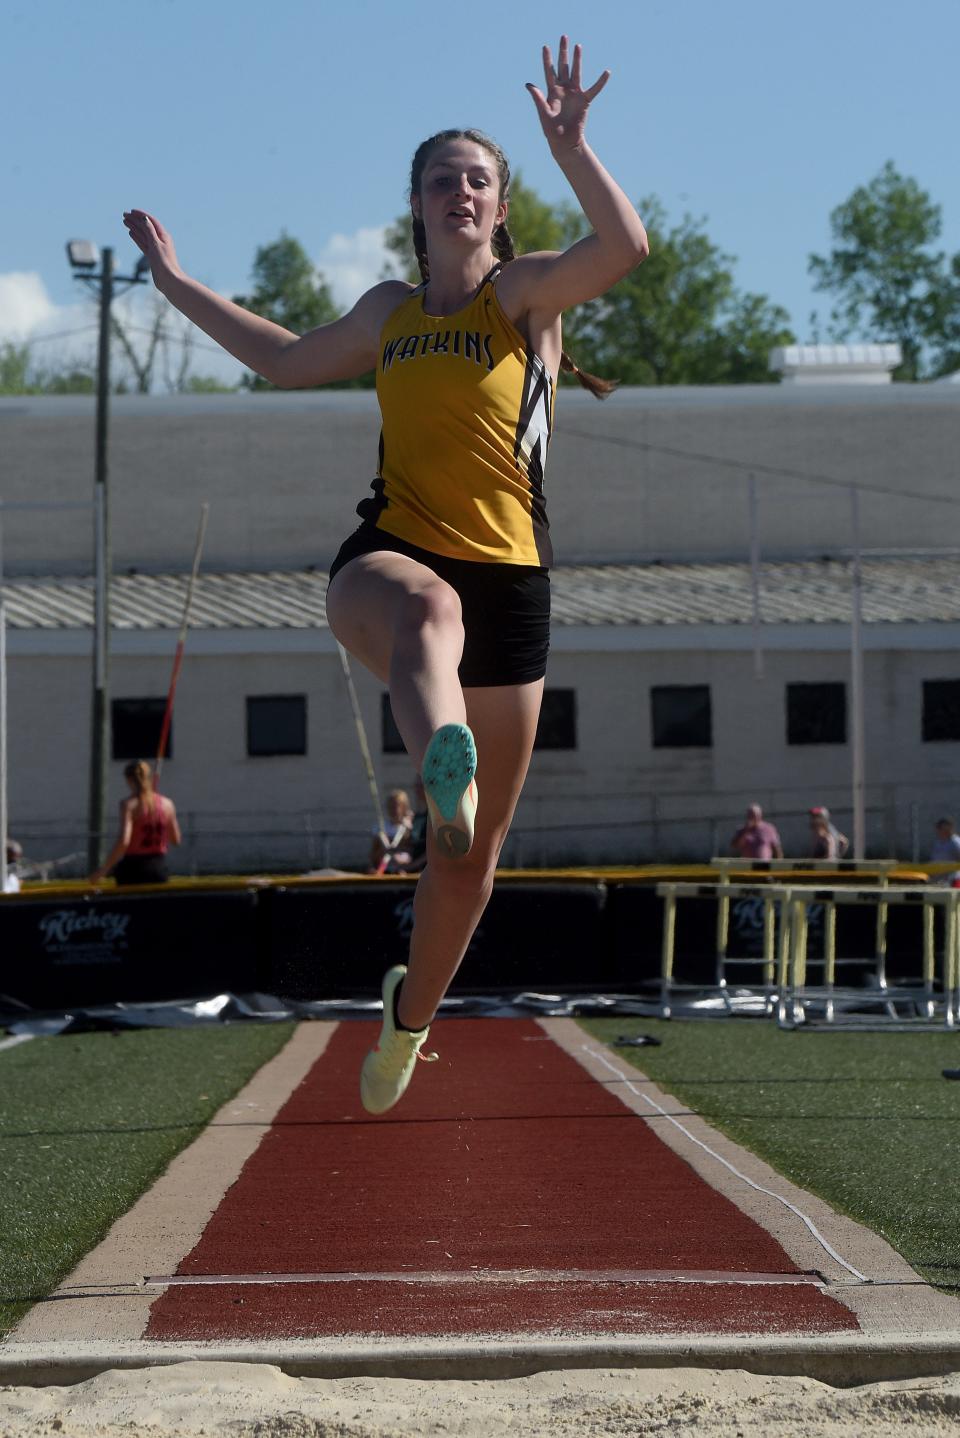 Watkins Memorial's Jenna Lucas competes in the Buckeye Division long jump during the second day of the Licking County League track meet Friday at Ascena Field. She leaped a personal best 17-7 to win the event.